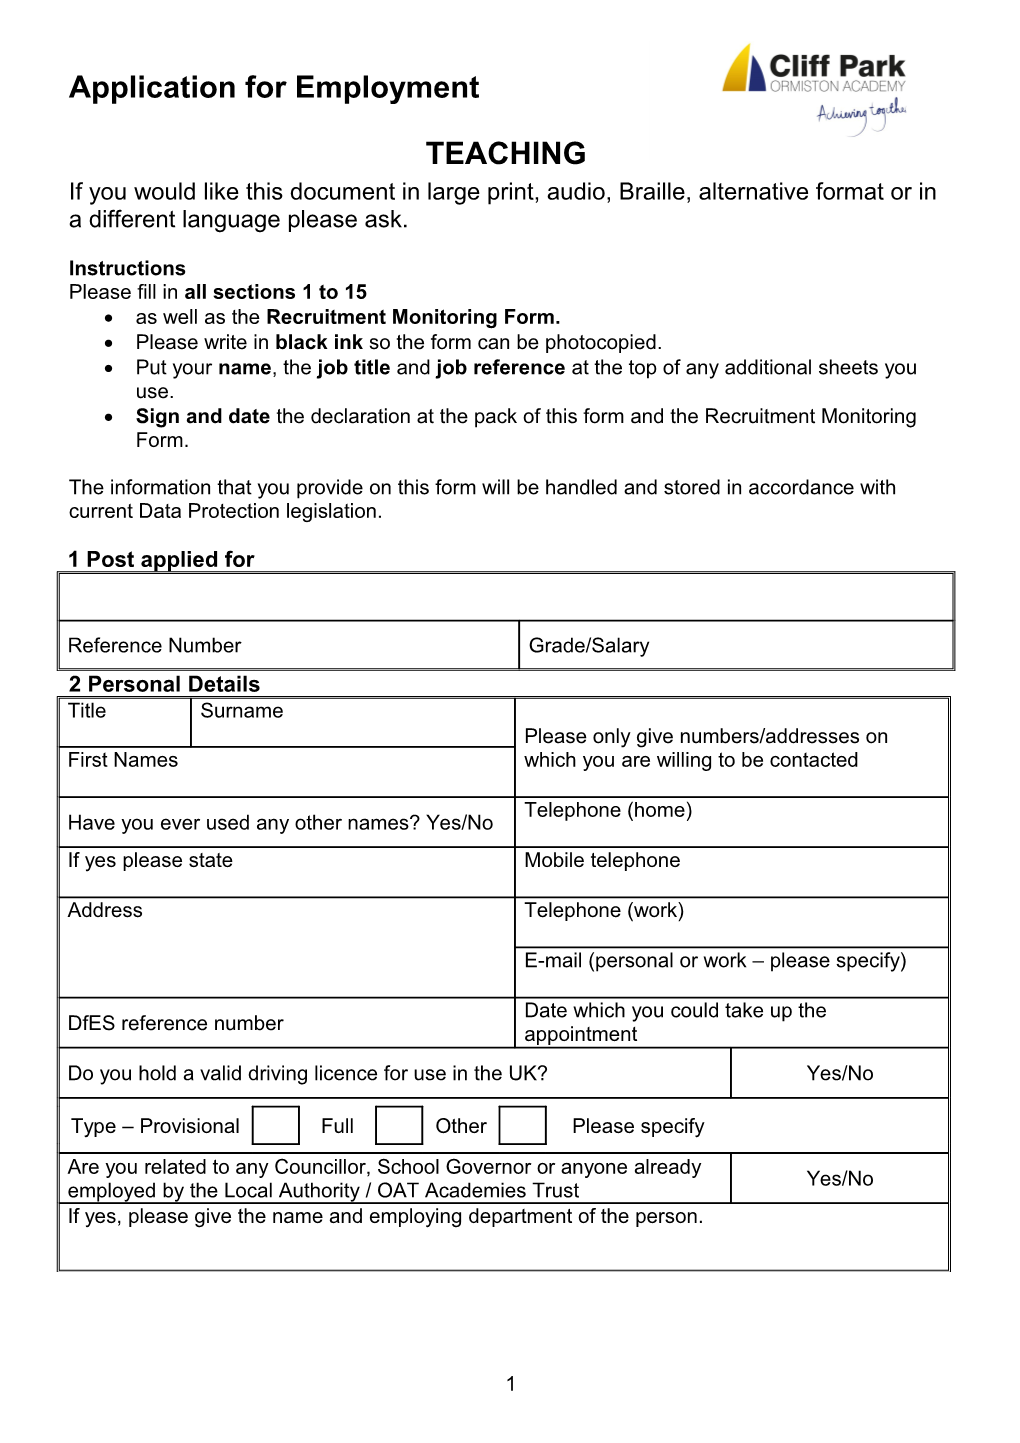 Please Fill in All Sections 1 to 15